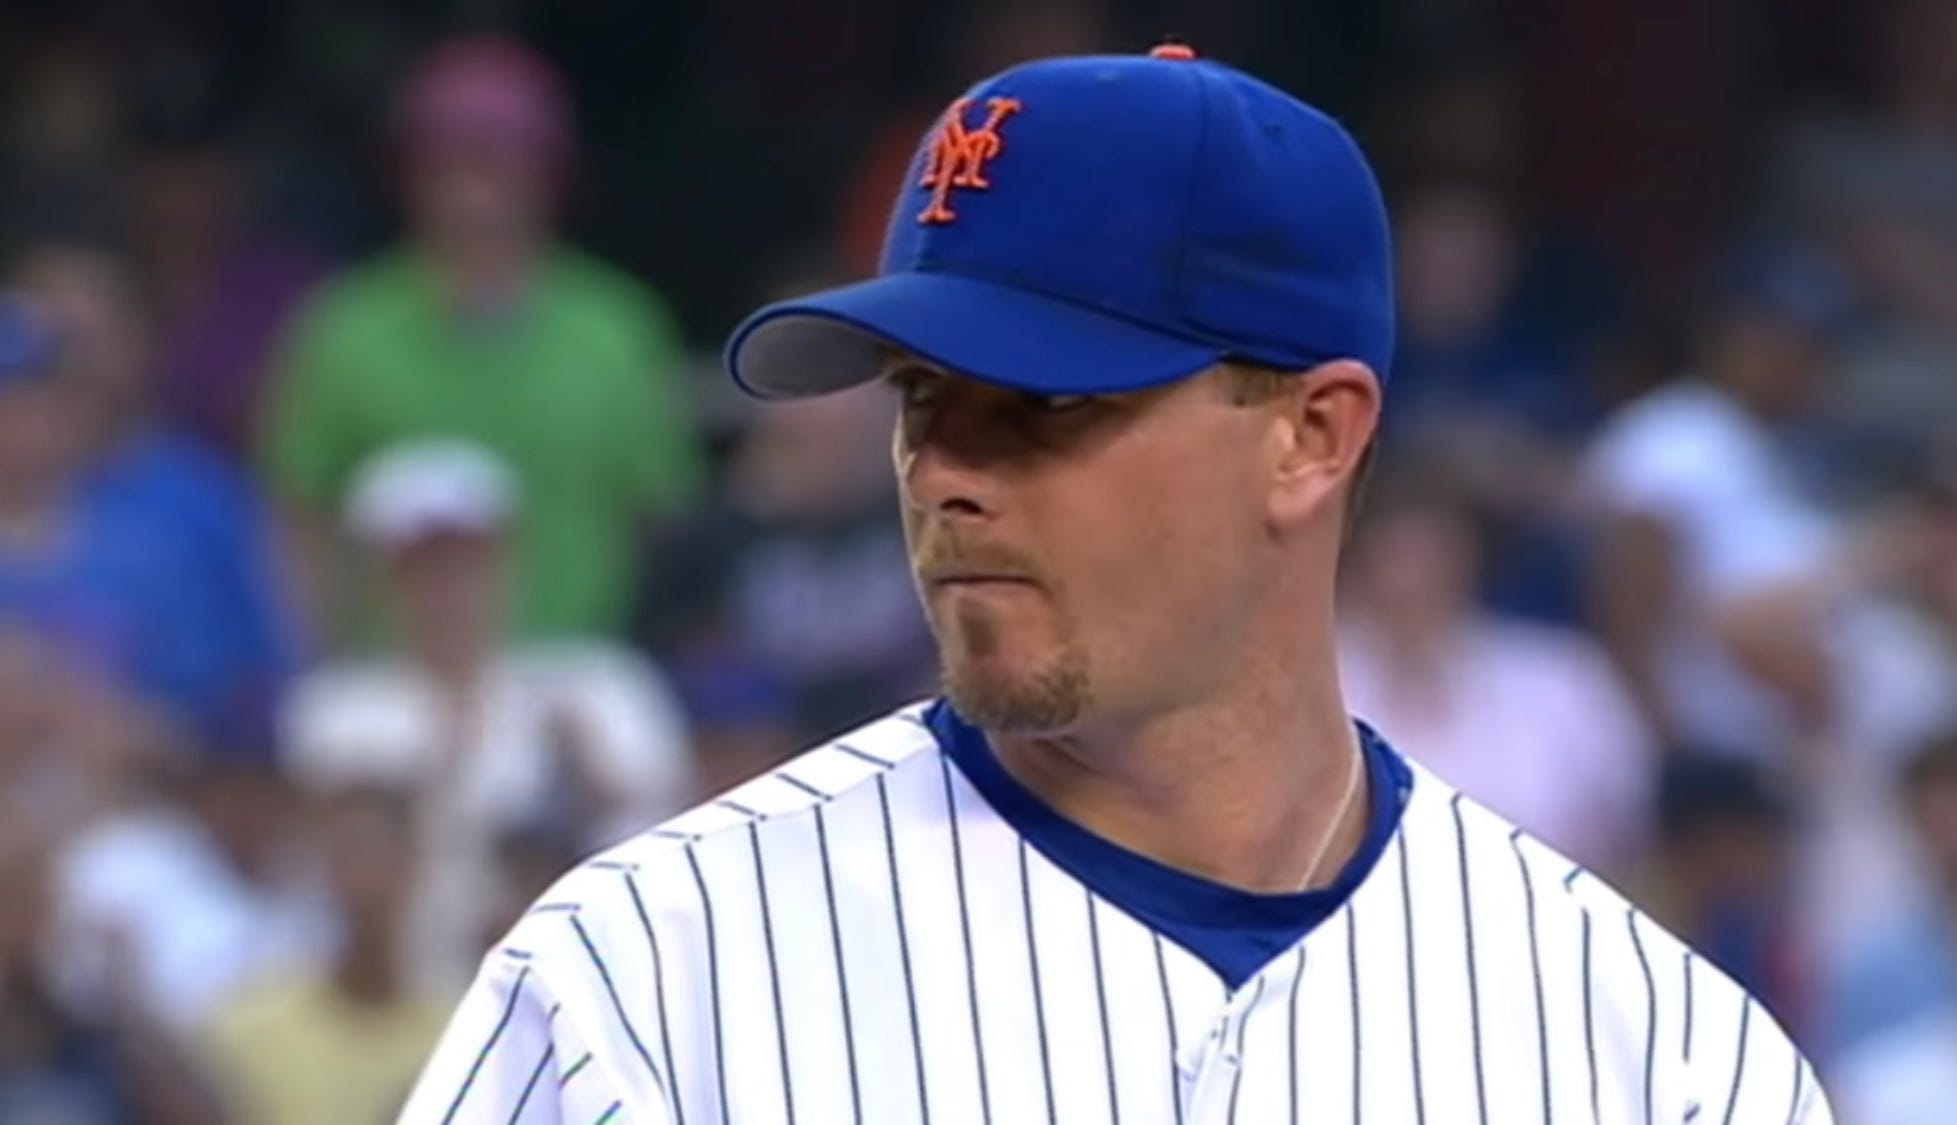 Billy Wagner is Undoubtedly a Hall of Famer - by Tim Ryder